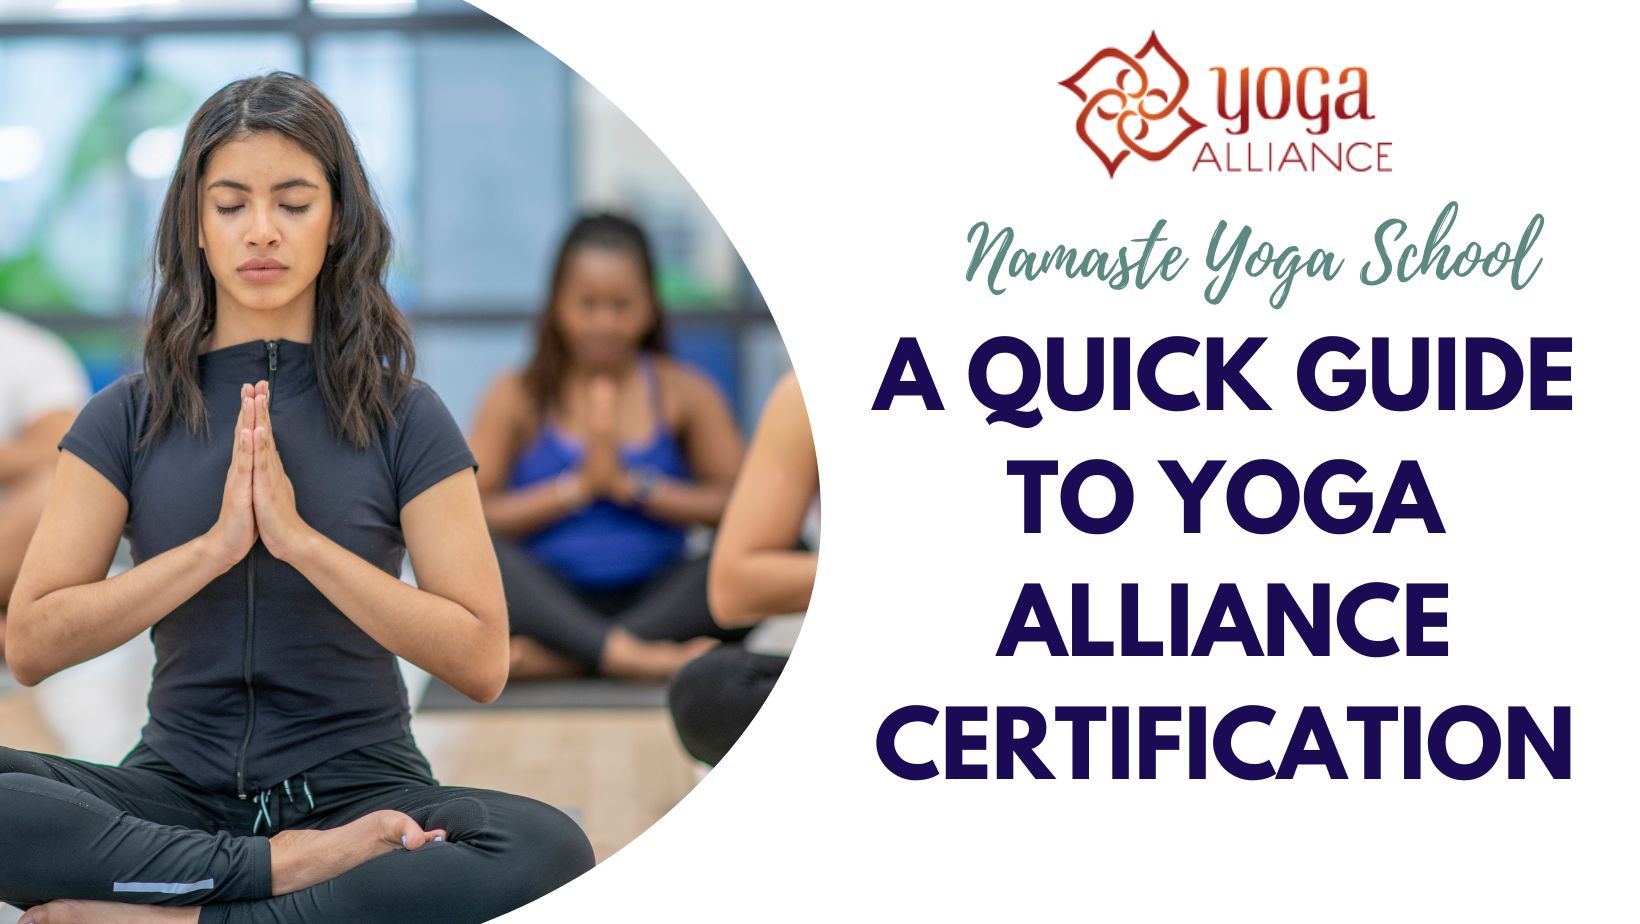 A quick guide to yoga alliance USA certification